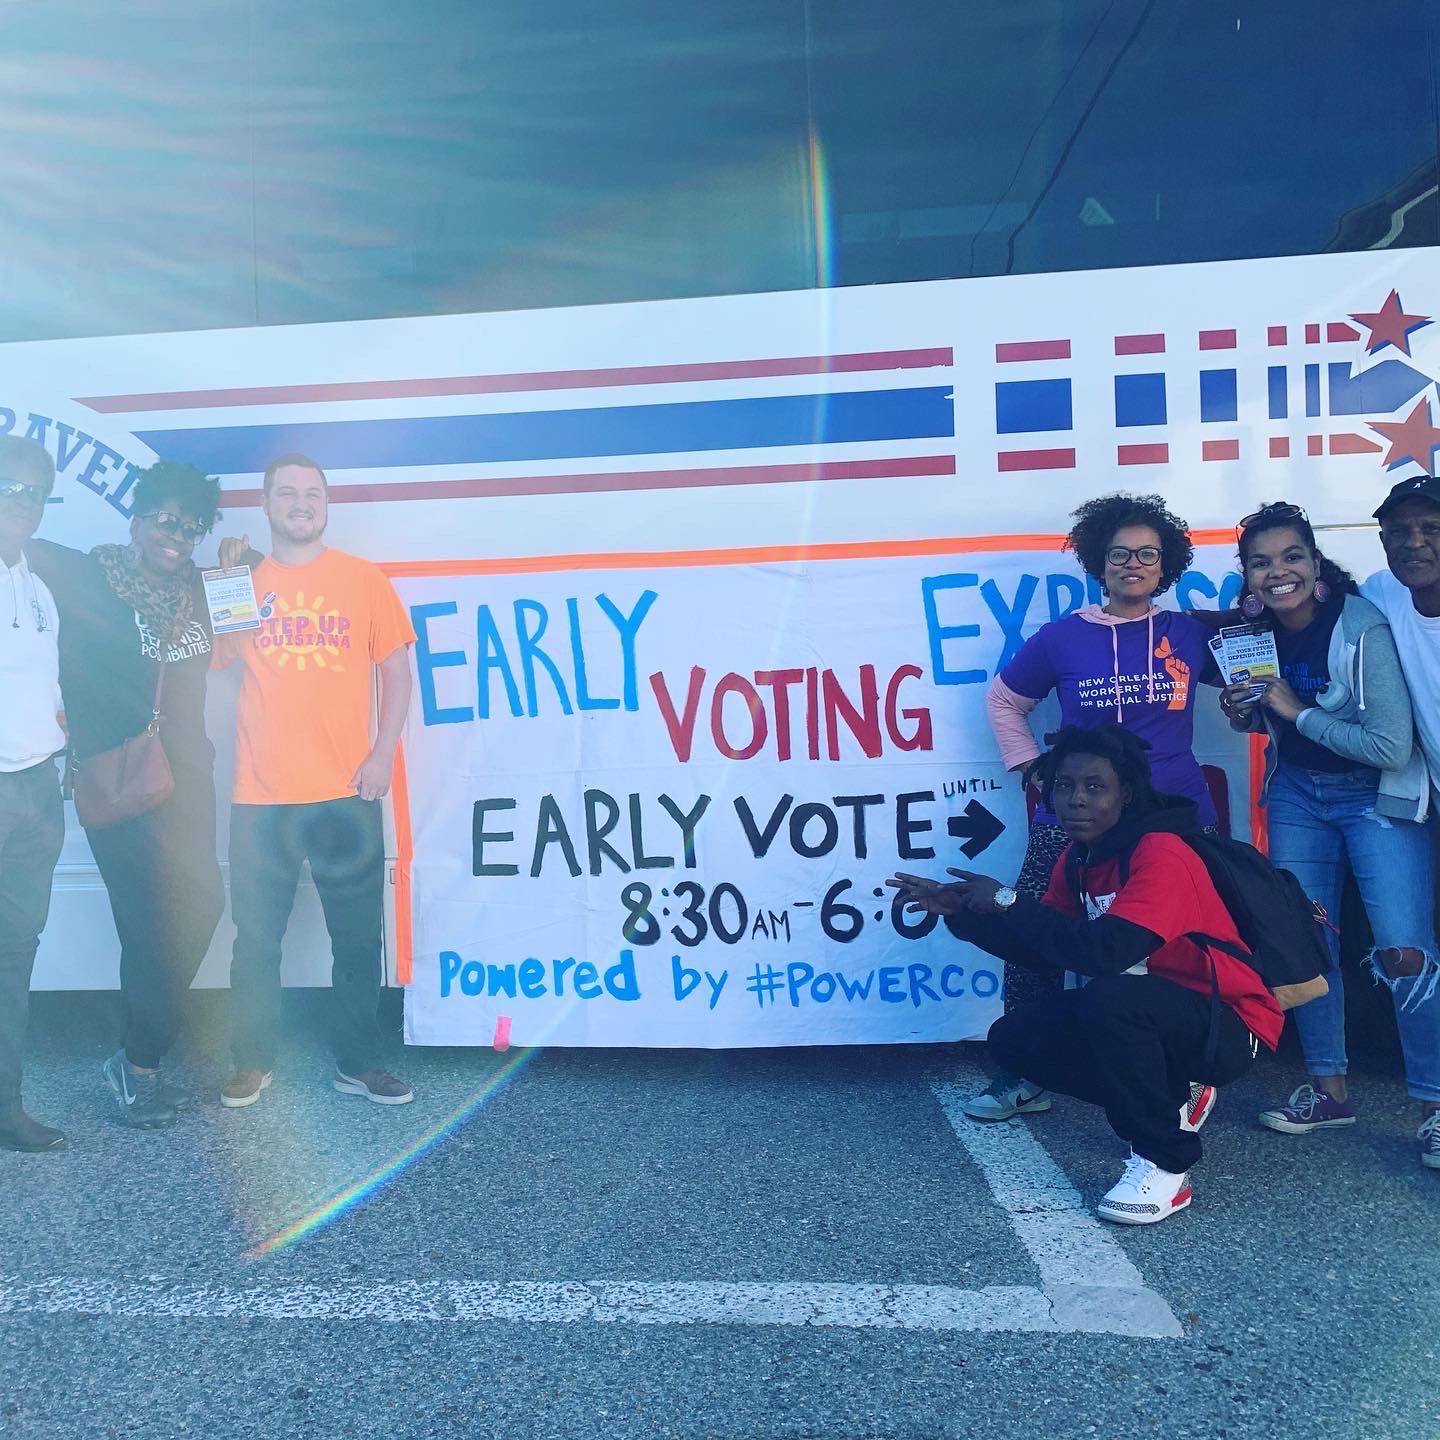 Get on the “Early Voting Express” with the Power Coalition for Equity and Justice